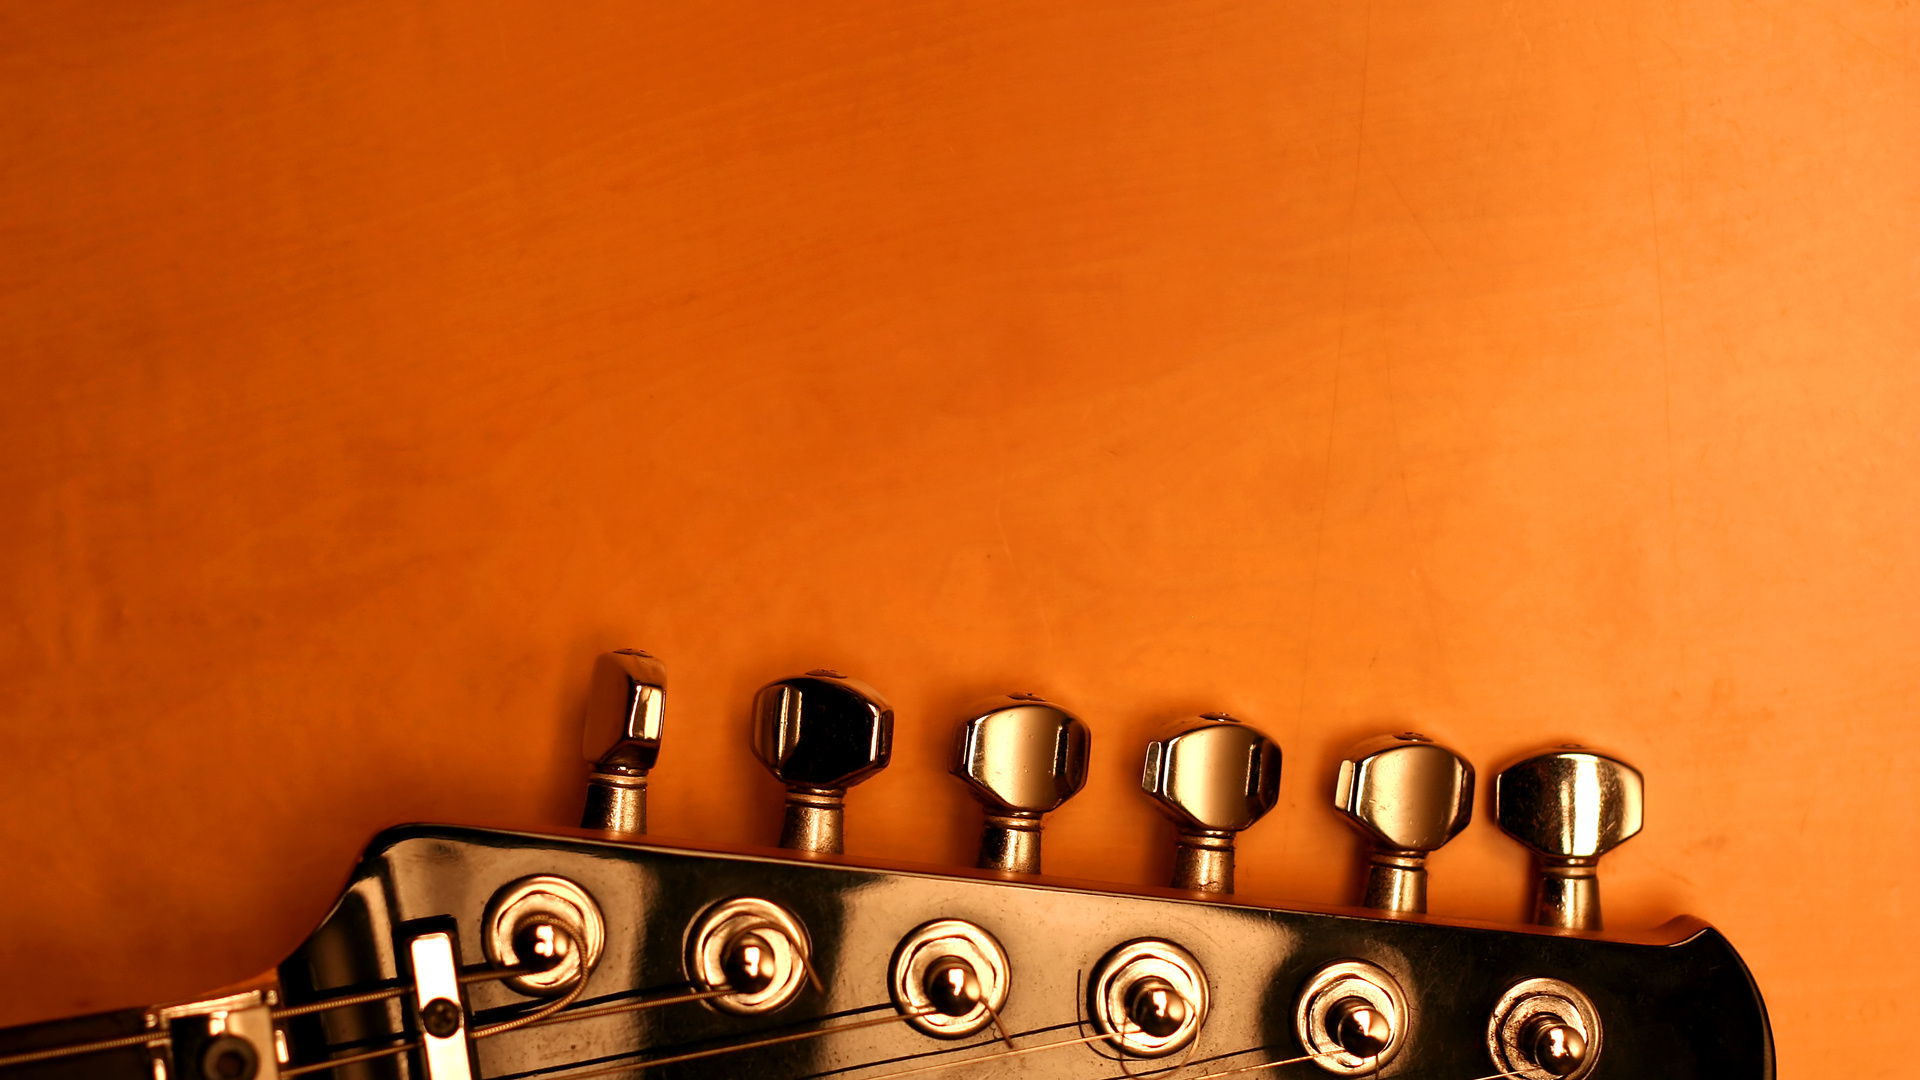 Guitar: A musical instrument projecting sound either acoustically or amplified by an electronic pickup and an amplifier. 1920x1080 Full HD Background.